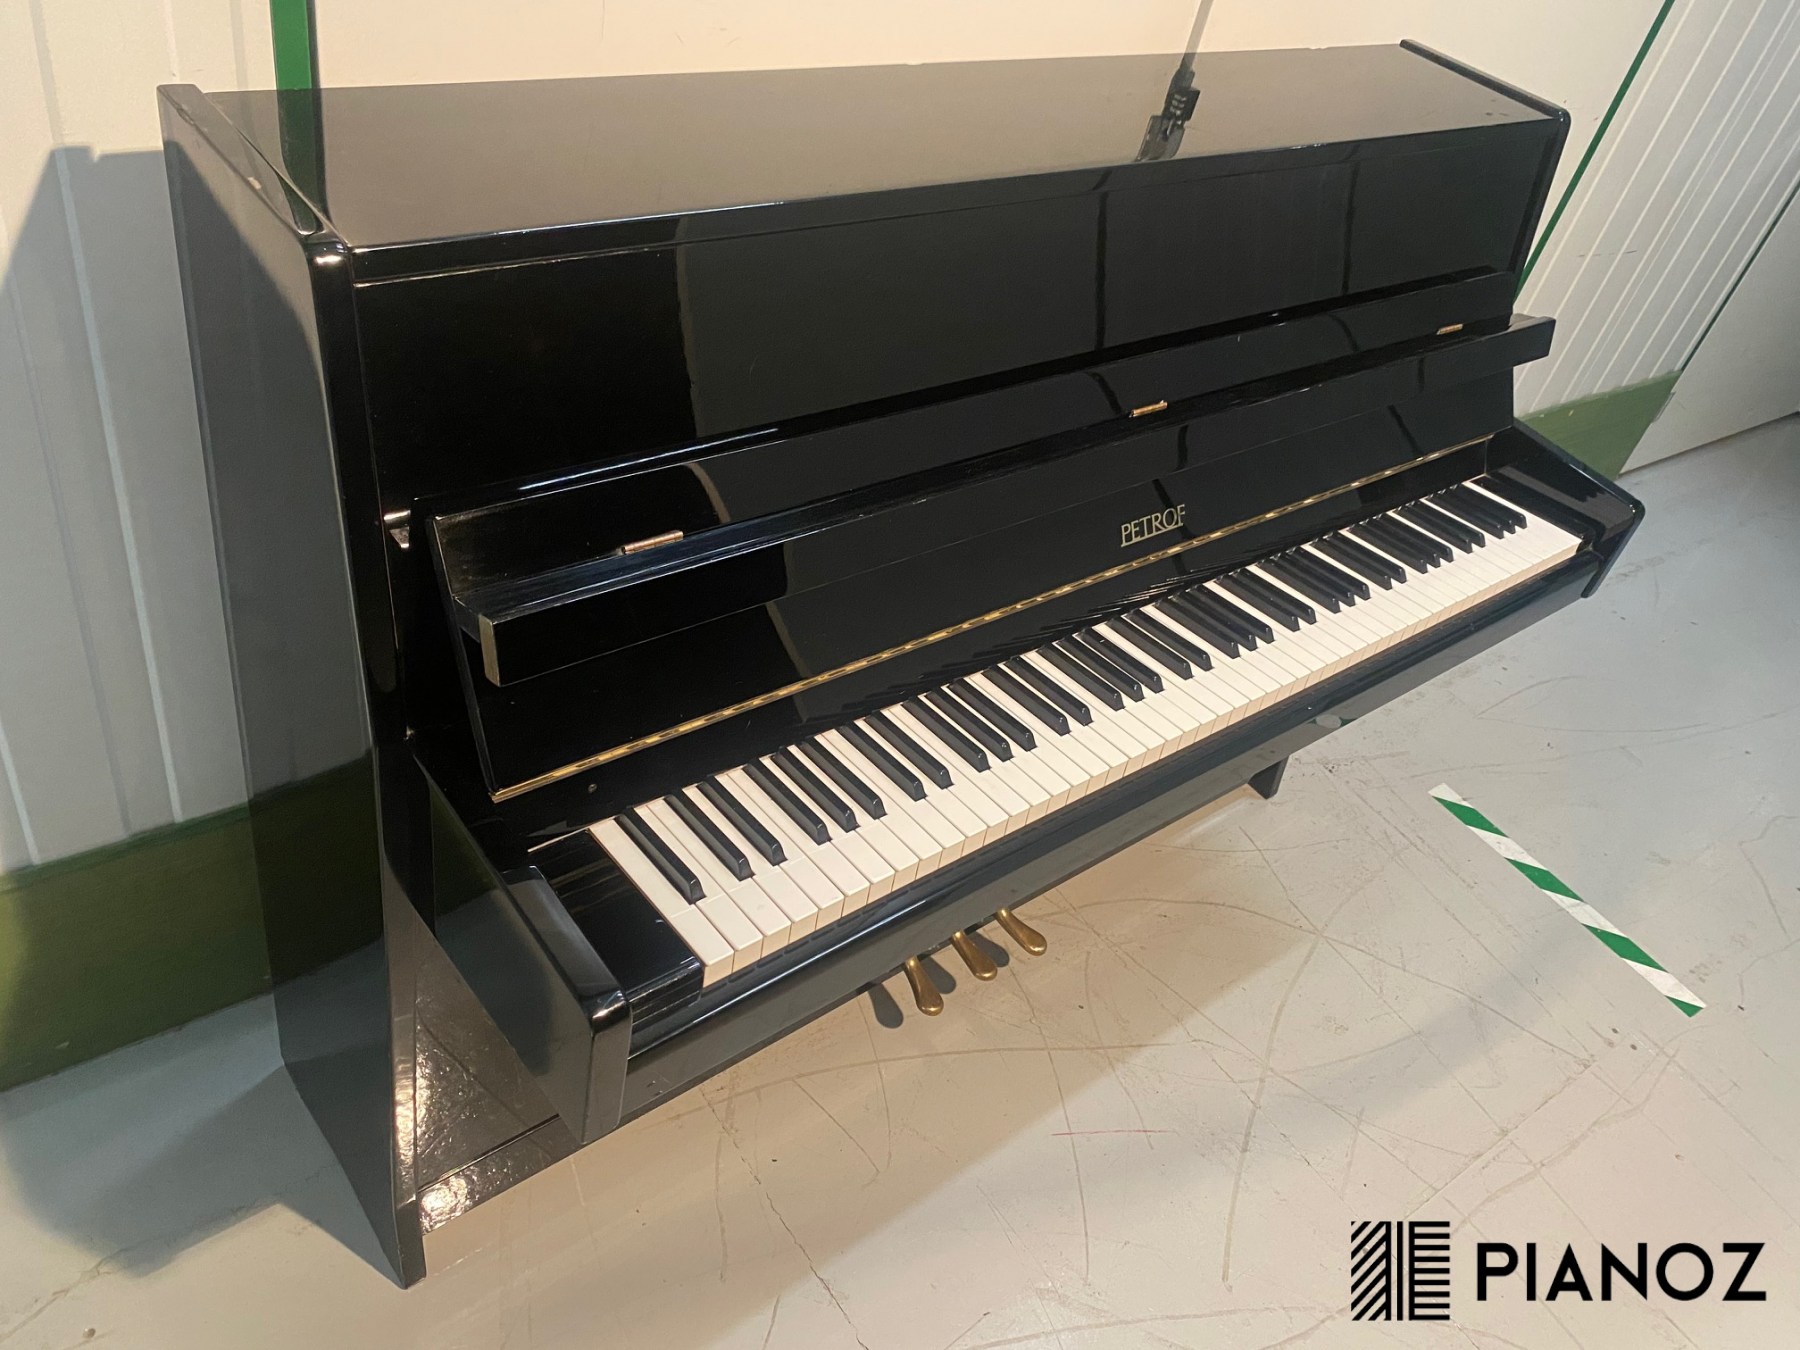 Petrof Compact Upright Piano piano for sale in UK